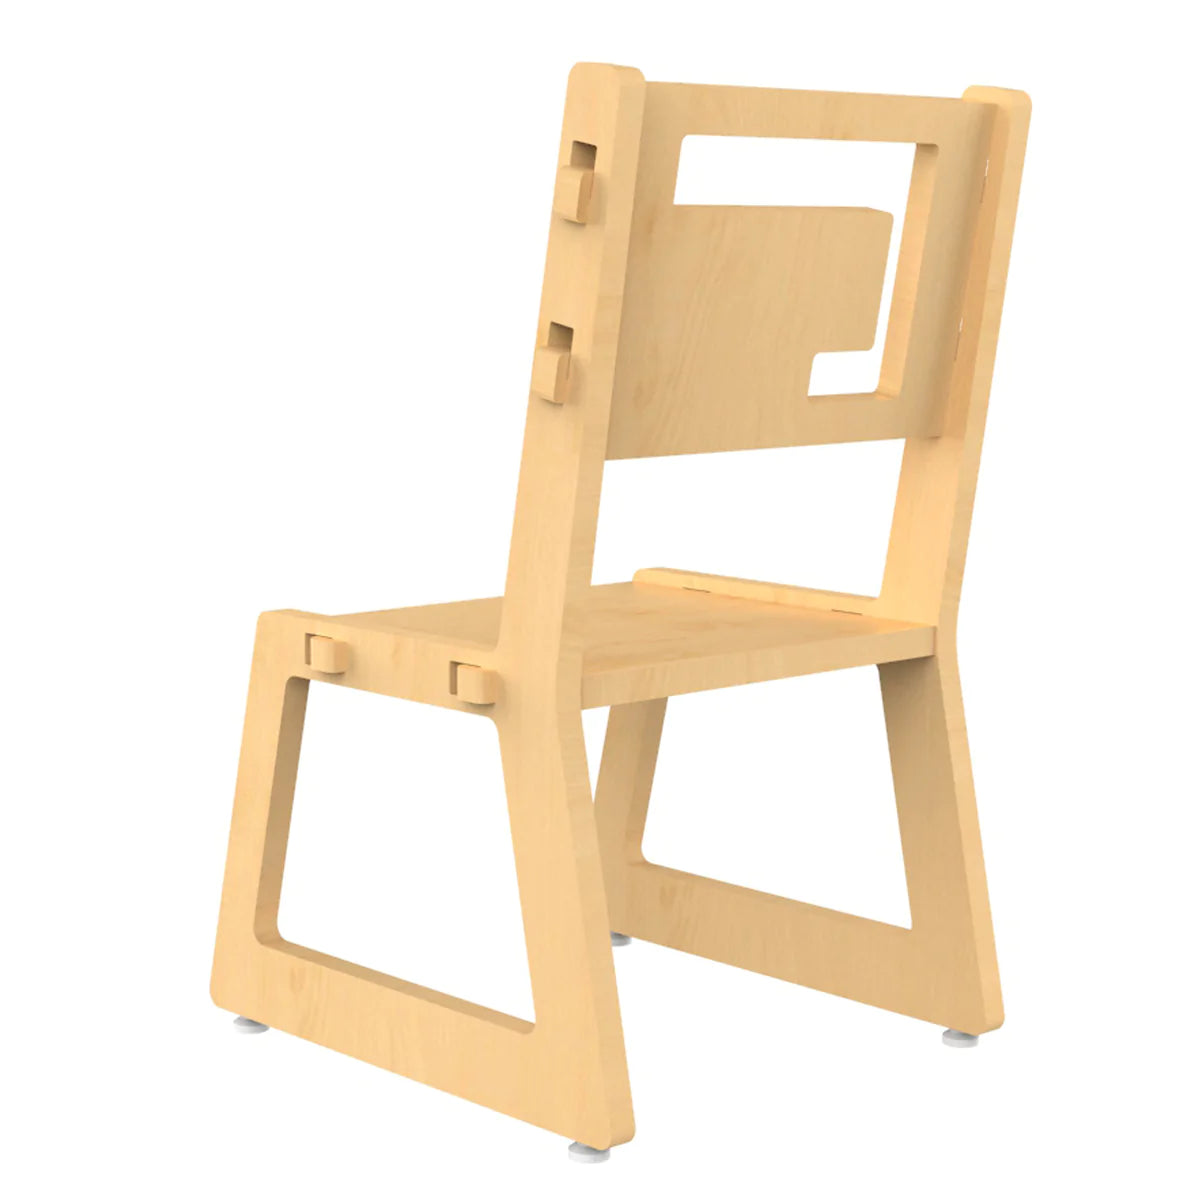 Buy Blue Apple Wooden Chair - Natural - Back View - SkilloToys.com